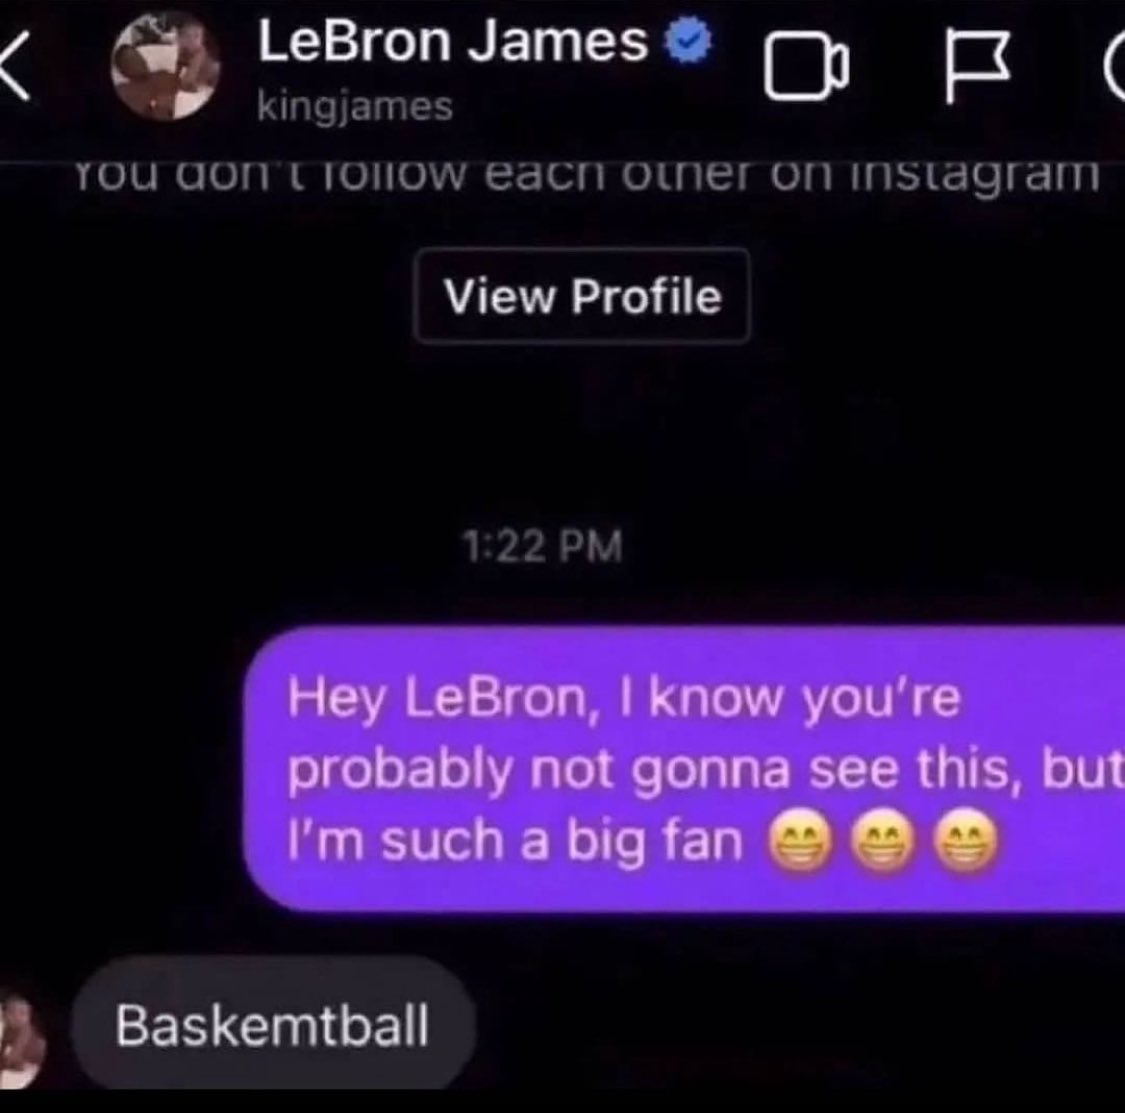 throwback to when lebron replied to my dm 🙏